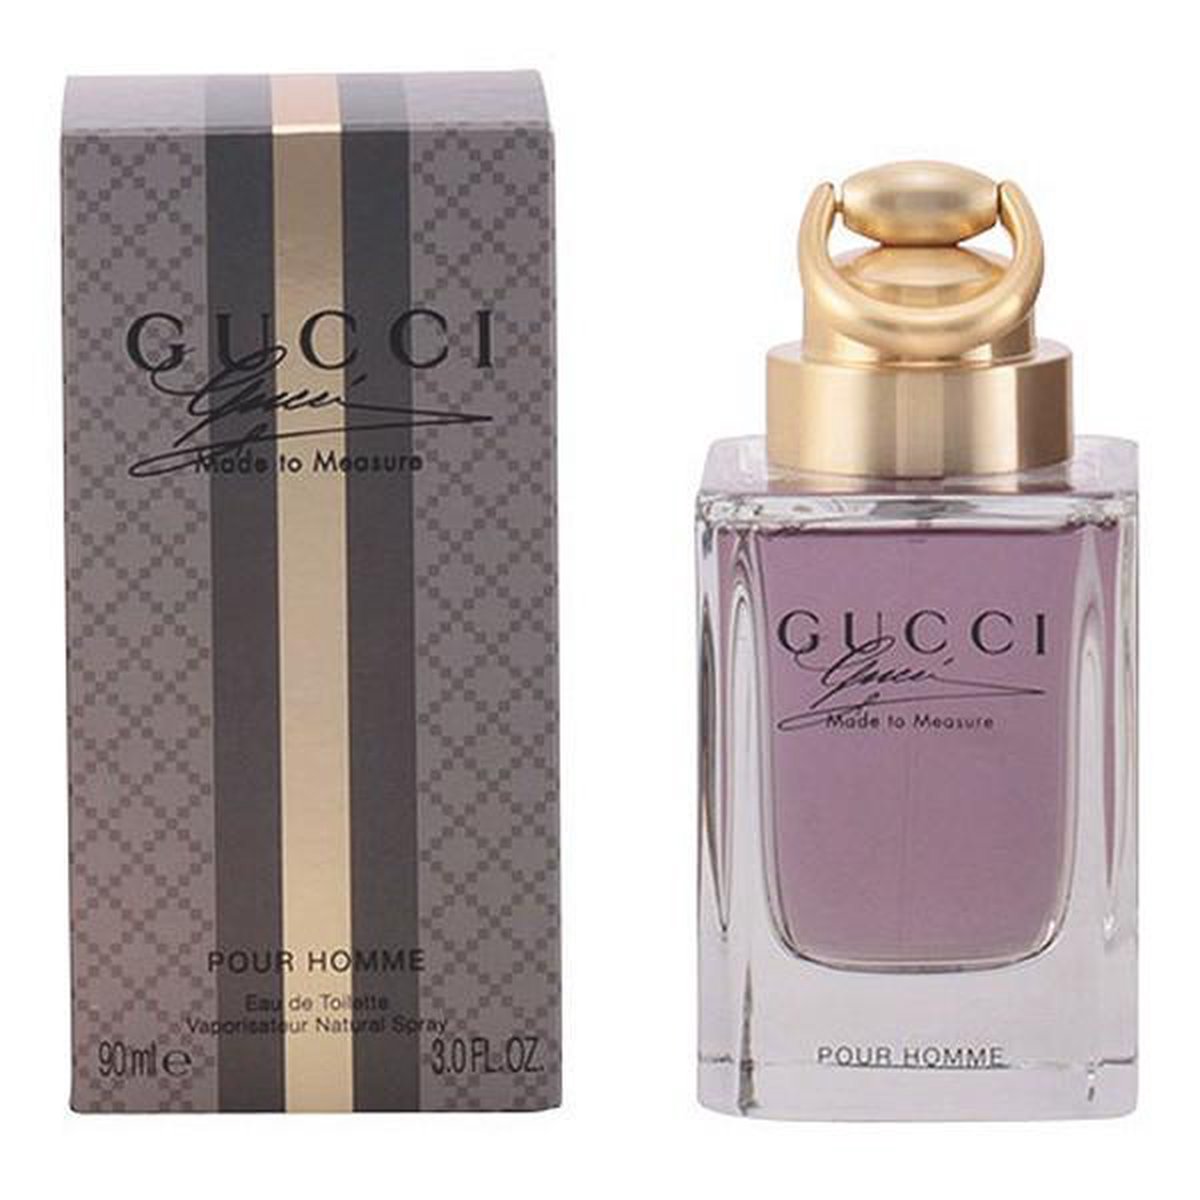 Gucci Made To Measure 100ml Flash Sales, 54% OFF | lagence.tv